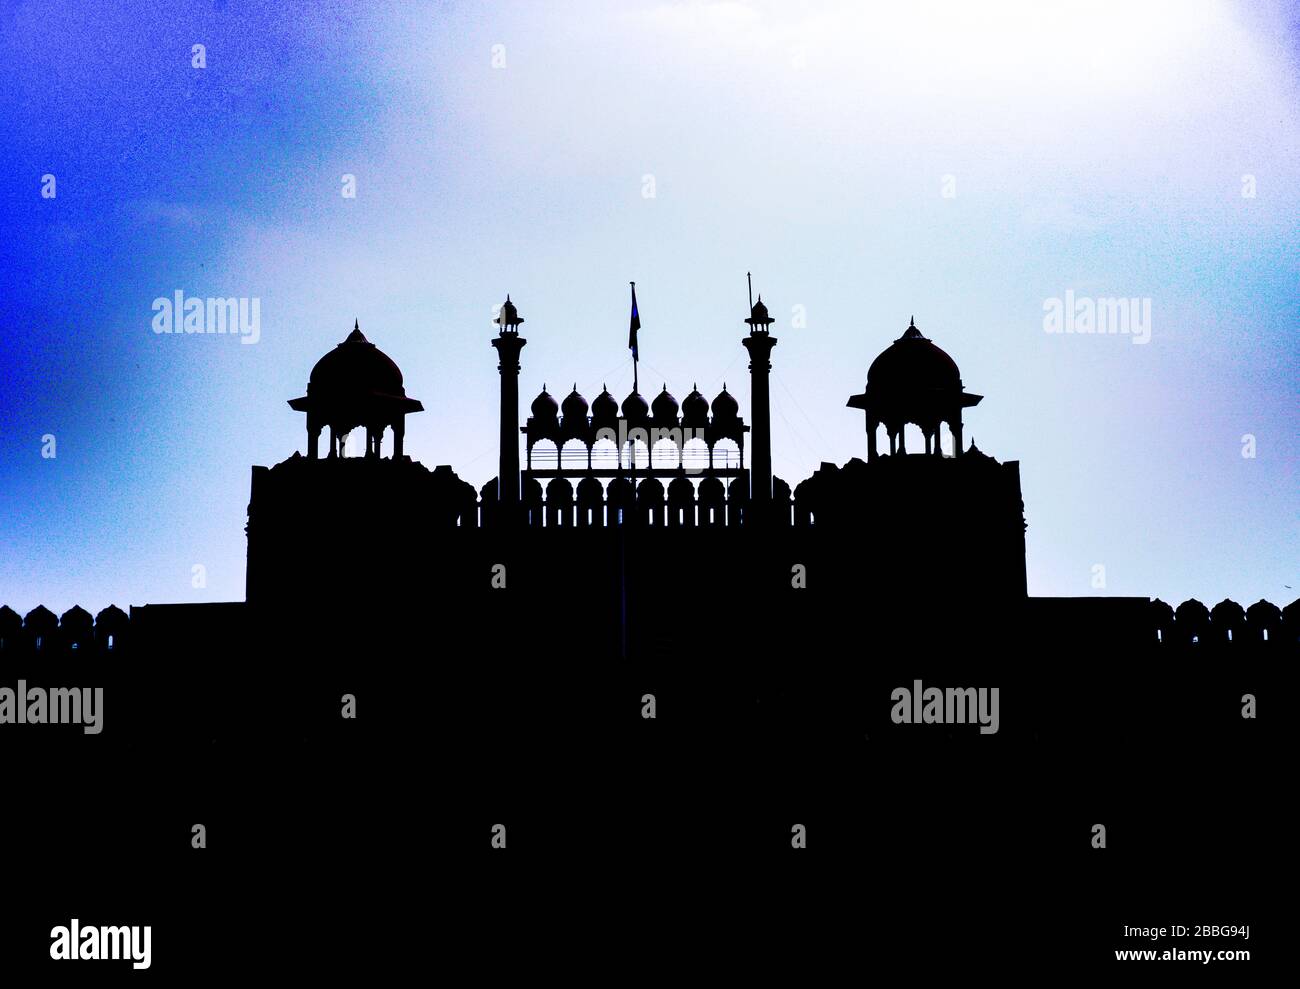 Lahore Gate of Red Fort in Old Delhi, Indien Stockfoto